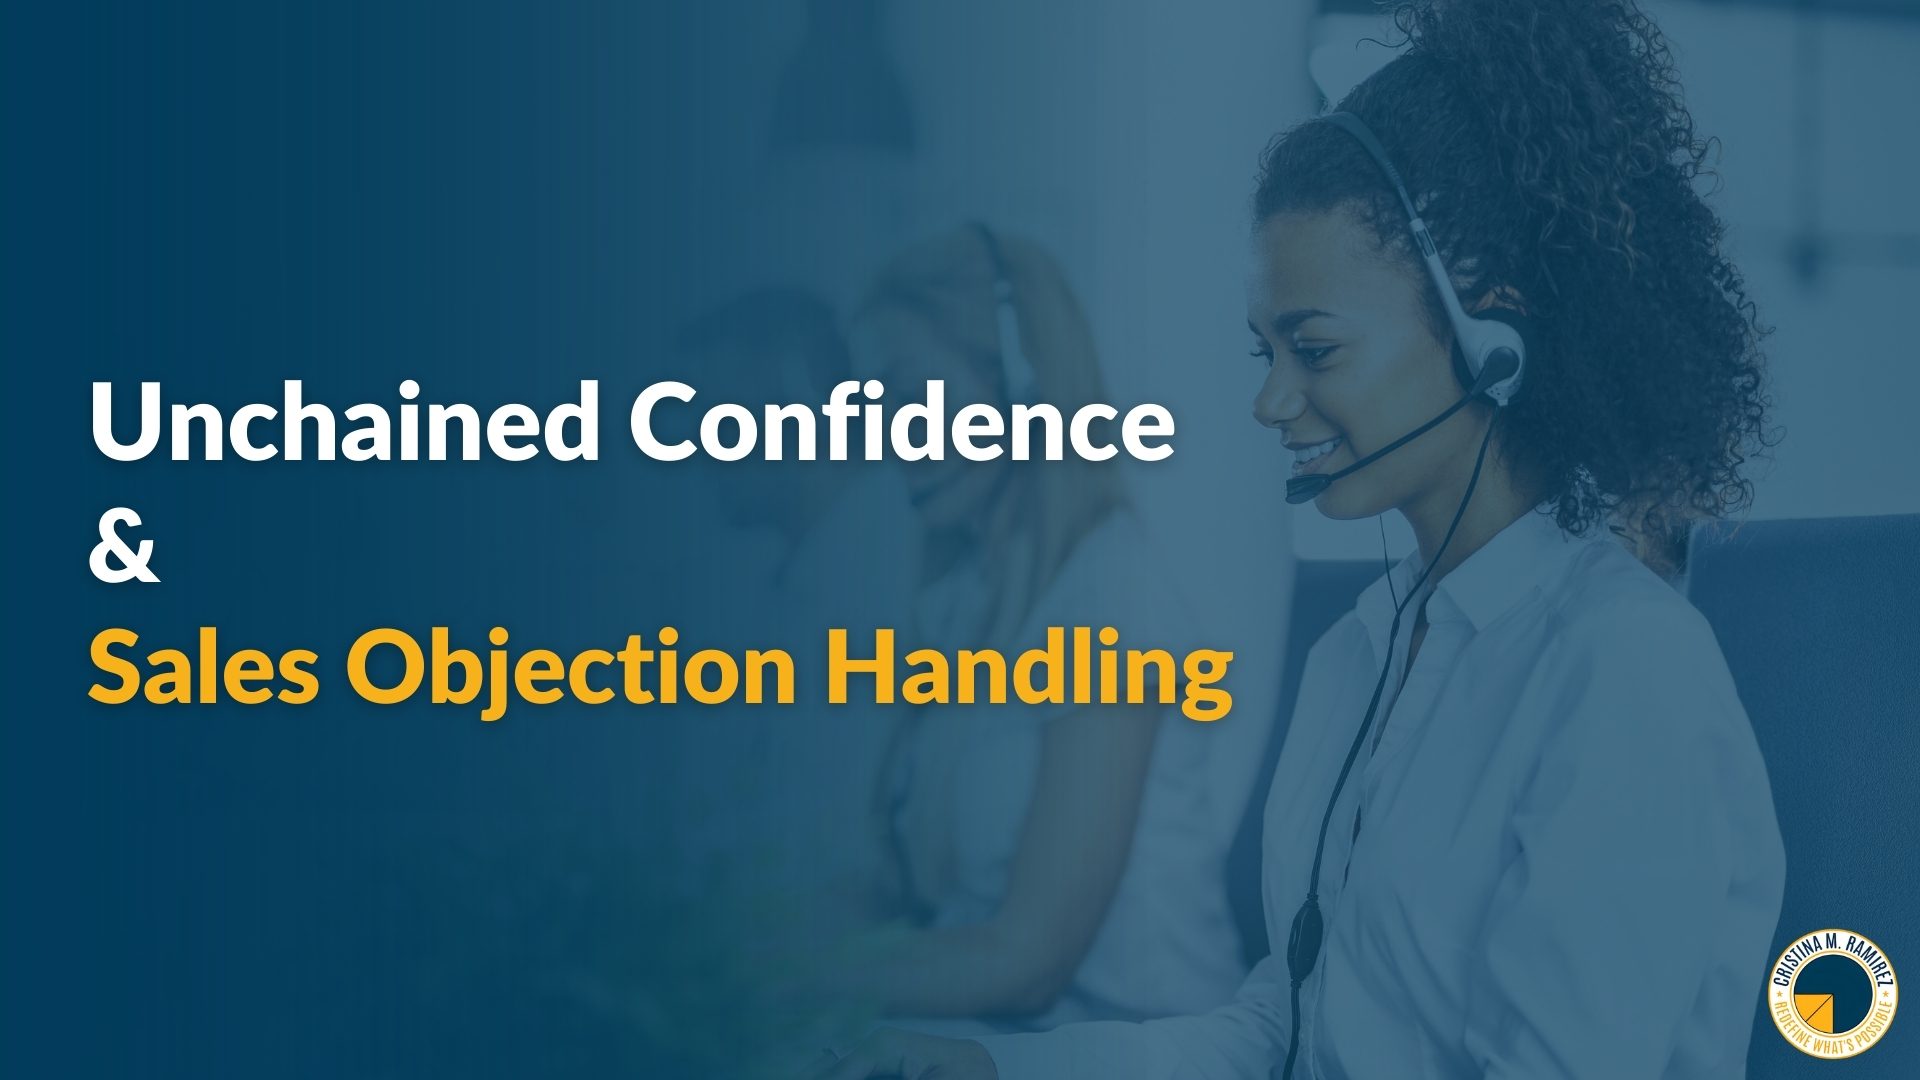 Unchained Confidence & Sales Objection Handling